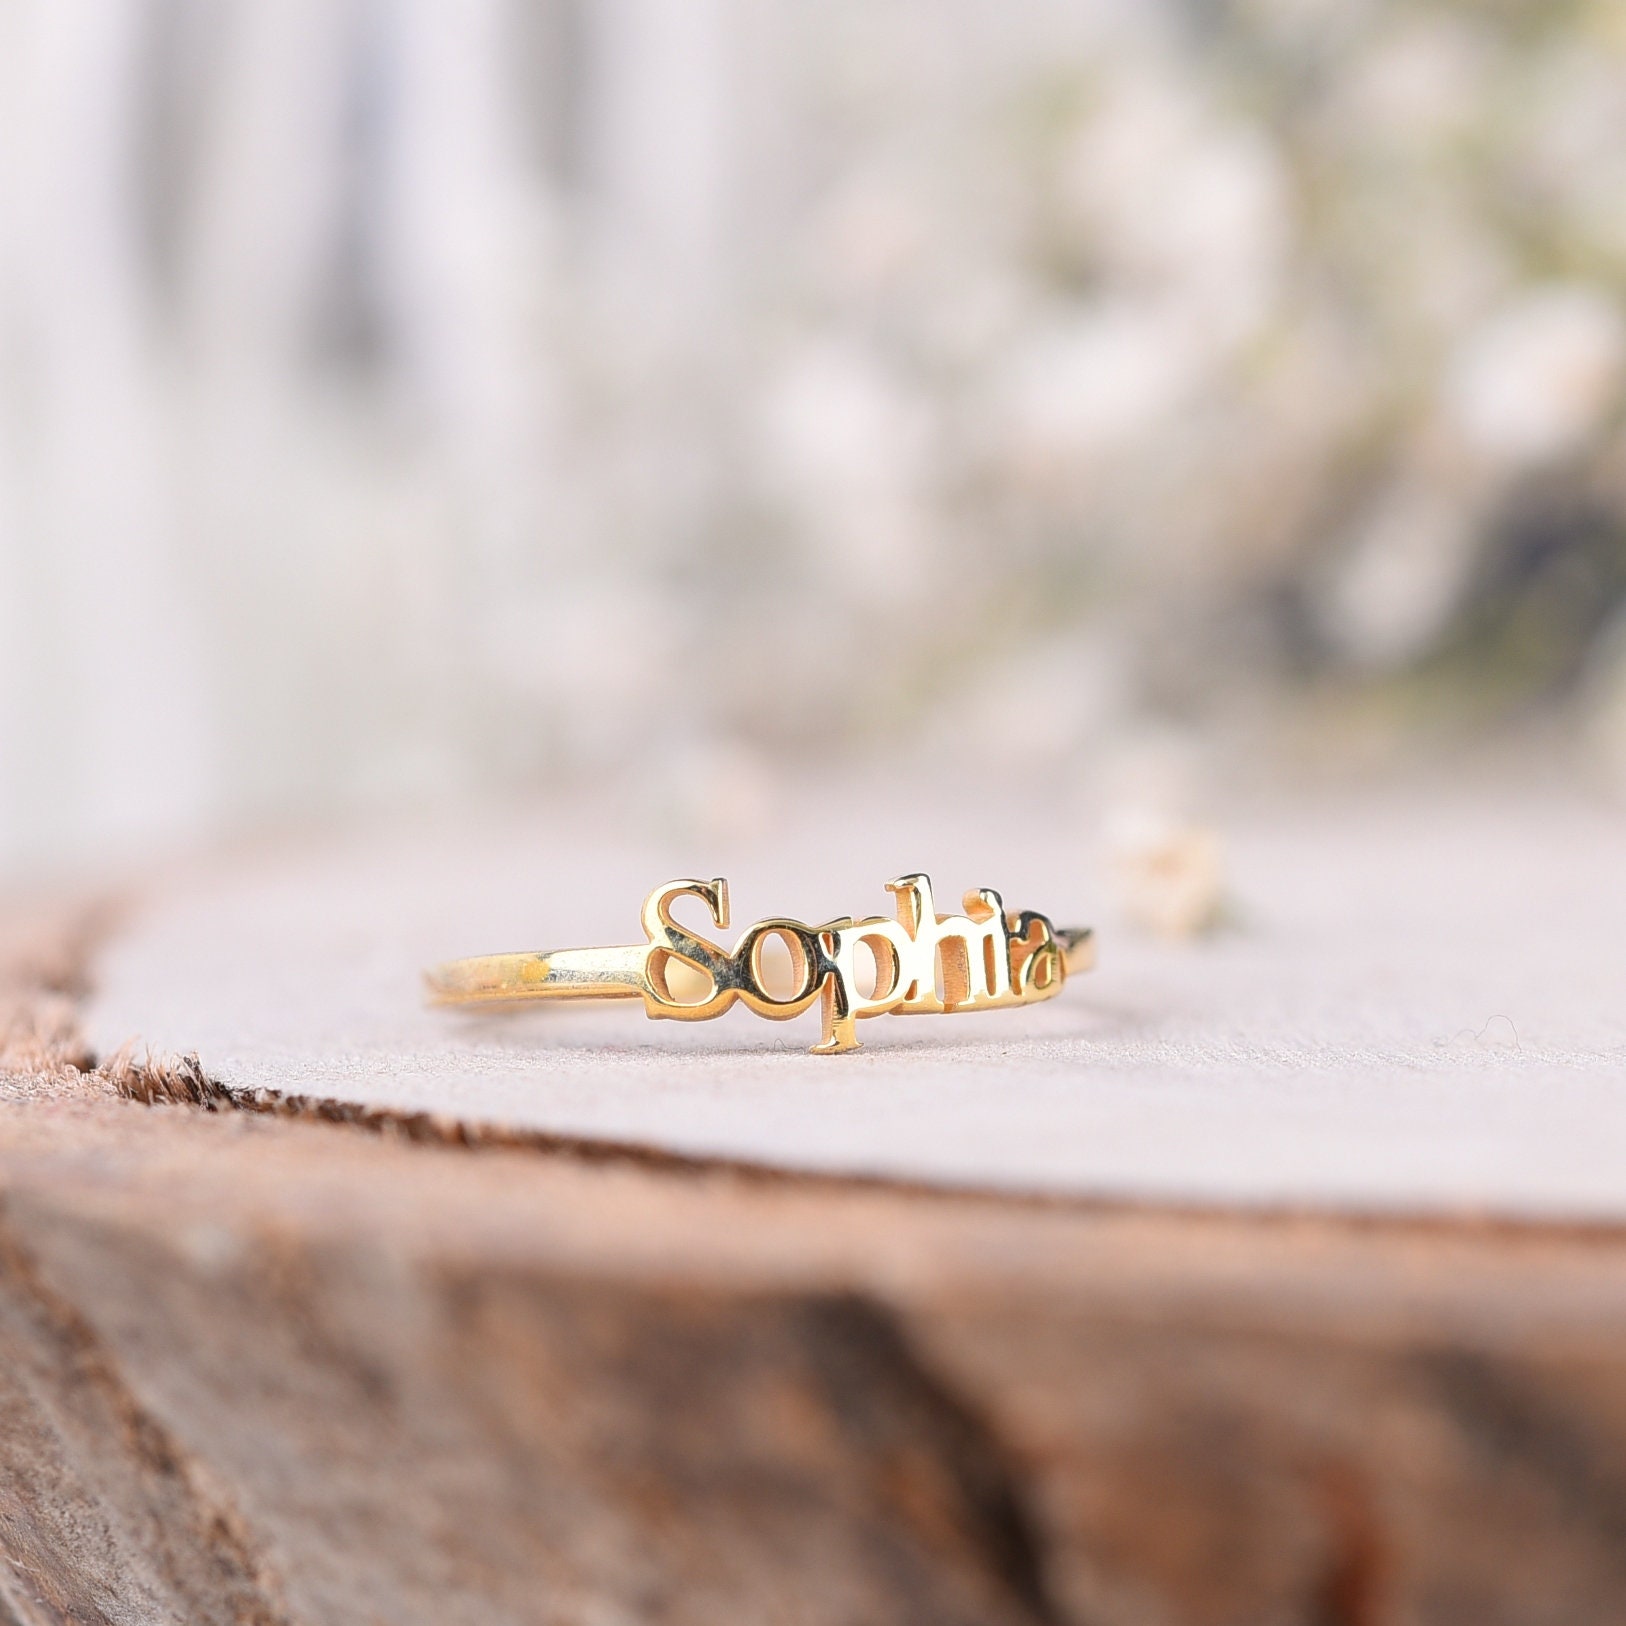 14k Solid Gold Custom Name Ring, Stackable Ring, Christmas Gift, Gift For Daughter, Dainty Delicate, Personalized Ring, Minimal Name Ringthumbnail